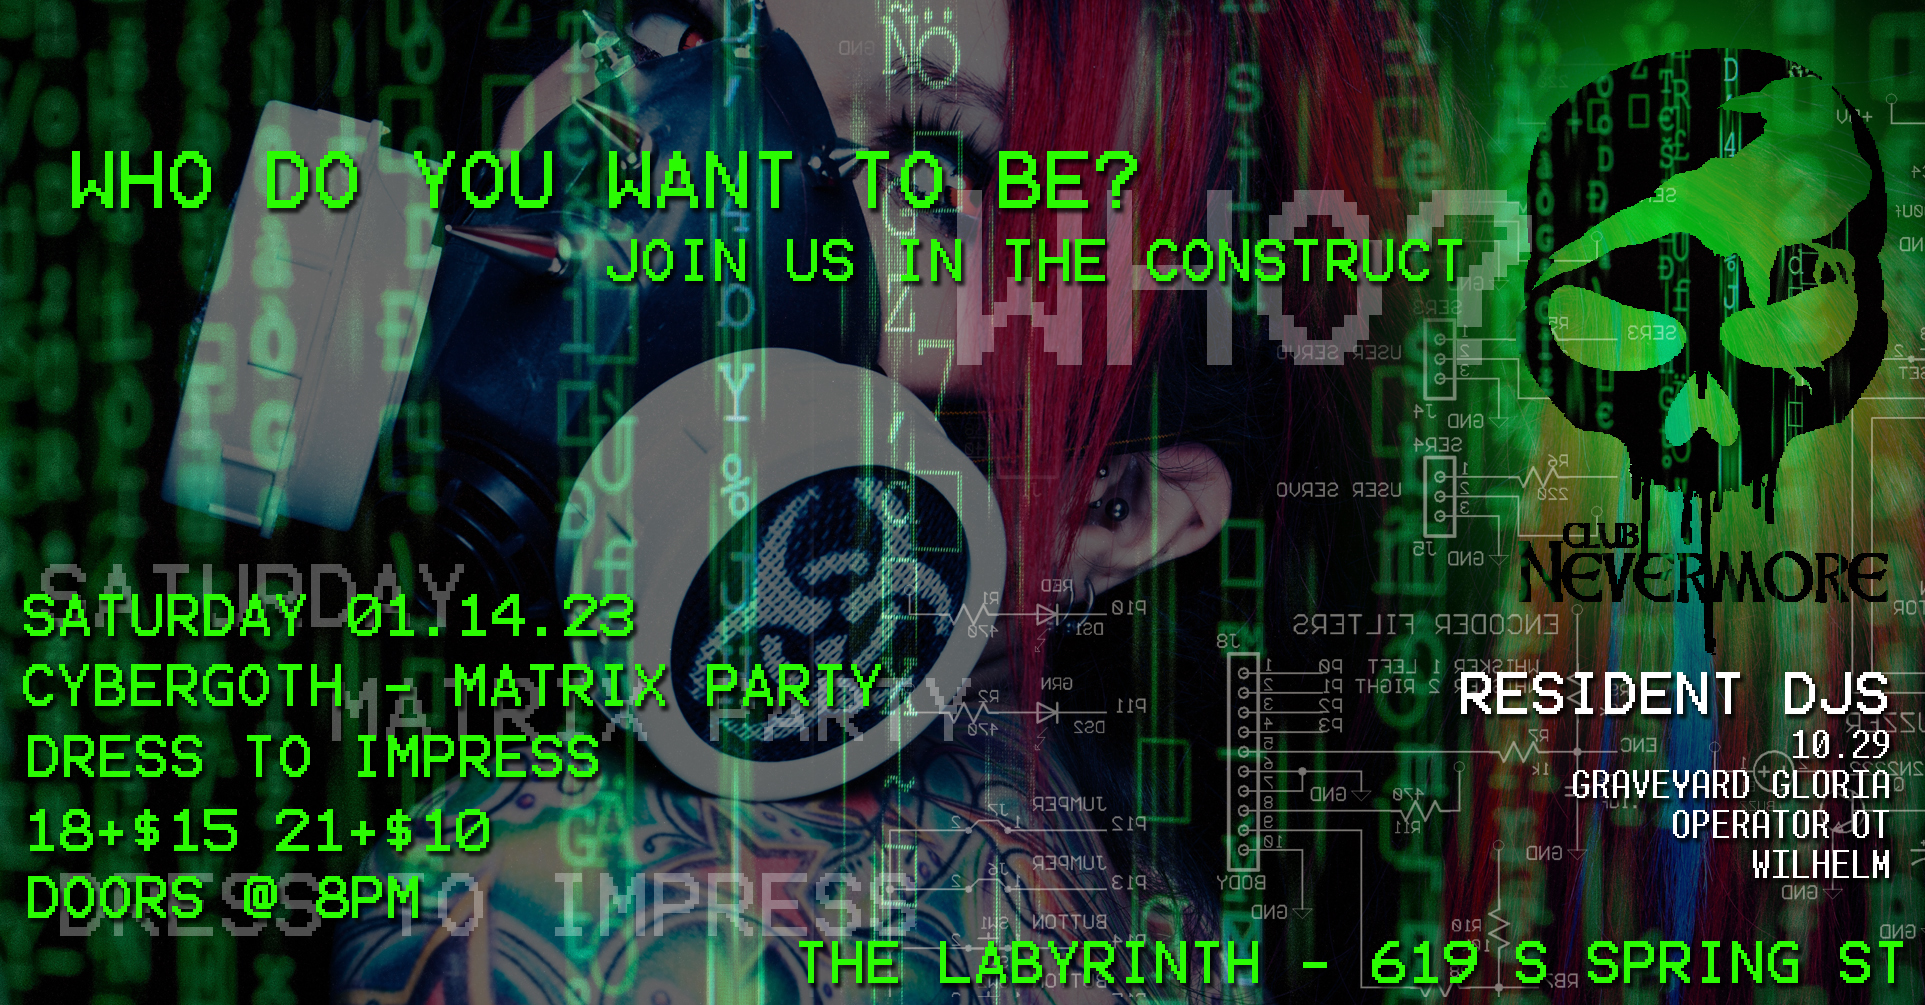 The text says, &ldquo;Who do you want to be? Join us in the Construct. Cybergoth-Matrix Party. Saturday, January 14, 2023 at The Labyrinth, 619 South Spring Street in Little Rock, Arkansas. Dress to impress (Matrix style). DJ sets by Club Nevermore&rsquo;s resident DJs DJ 10.29, DJ Graveyard Gloria, DJ Operator OT, and DJ Wilhelm. Admission is $15 for 18+, $10 for 21+.&rdquo;